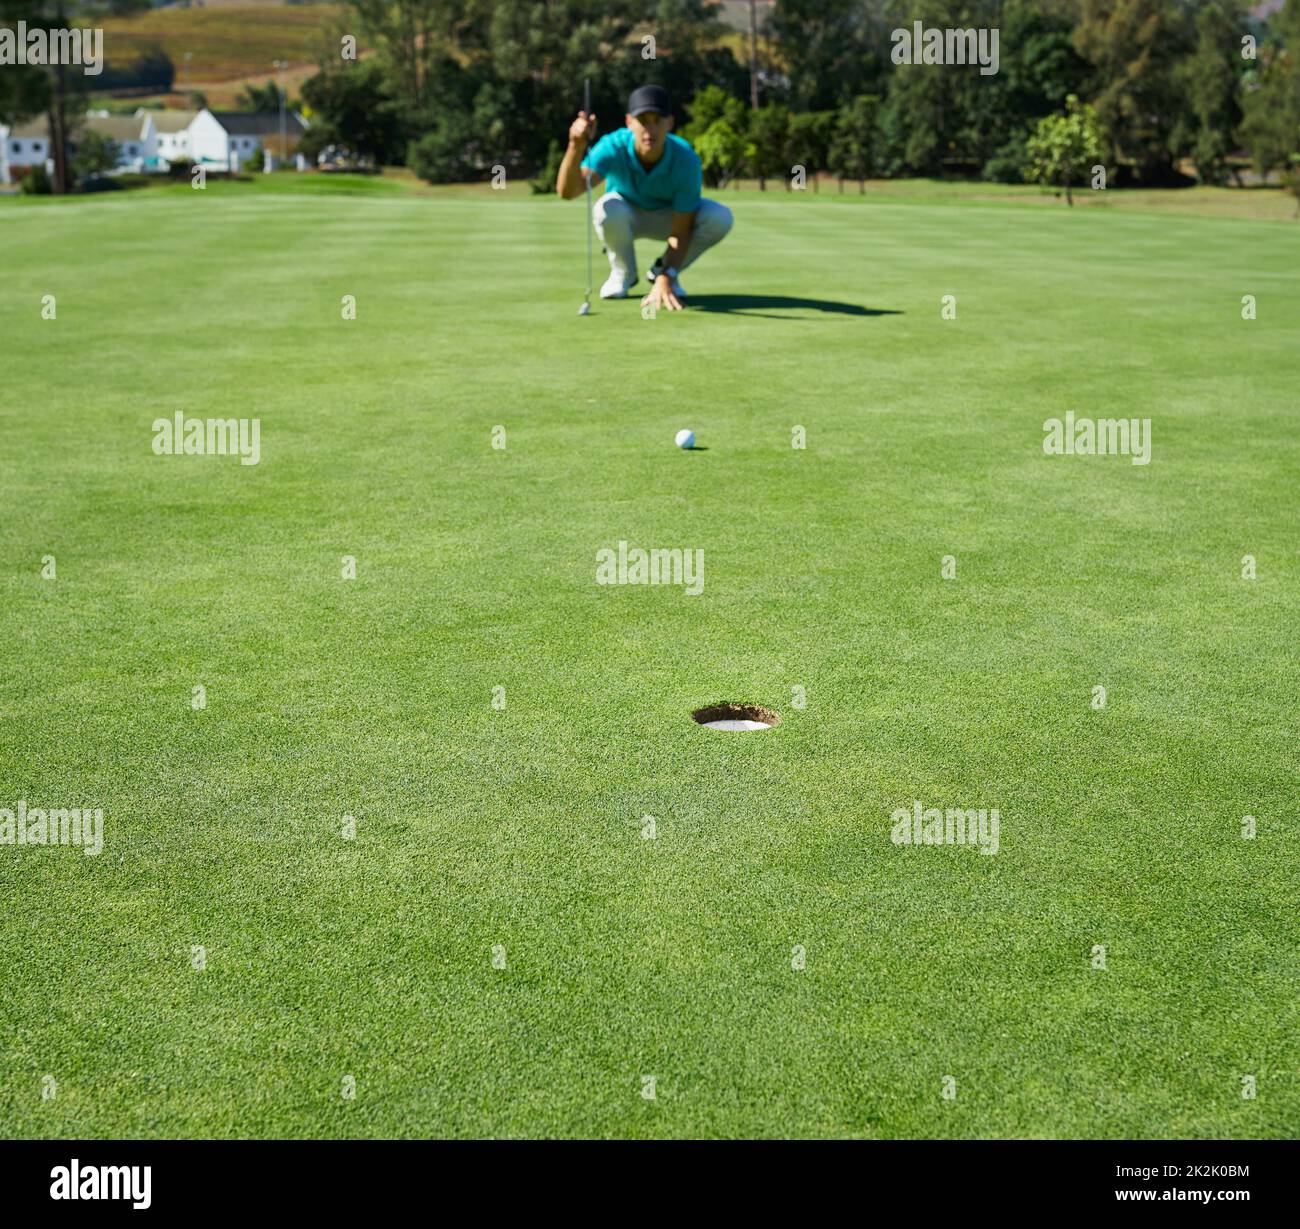 Making this look easy. Shot of a focused young man waiting for the golfball he just hit to go into a hole outside on a golf course. Stock Photo